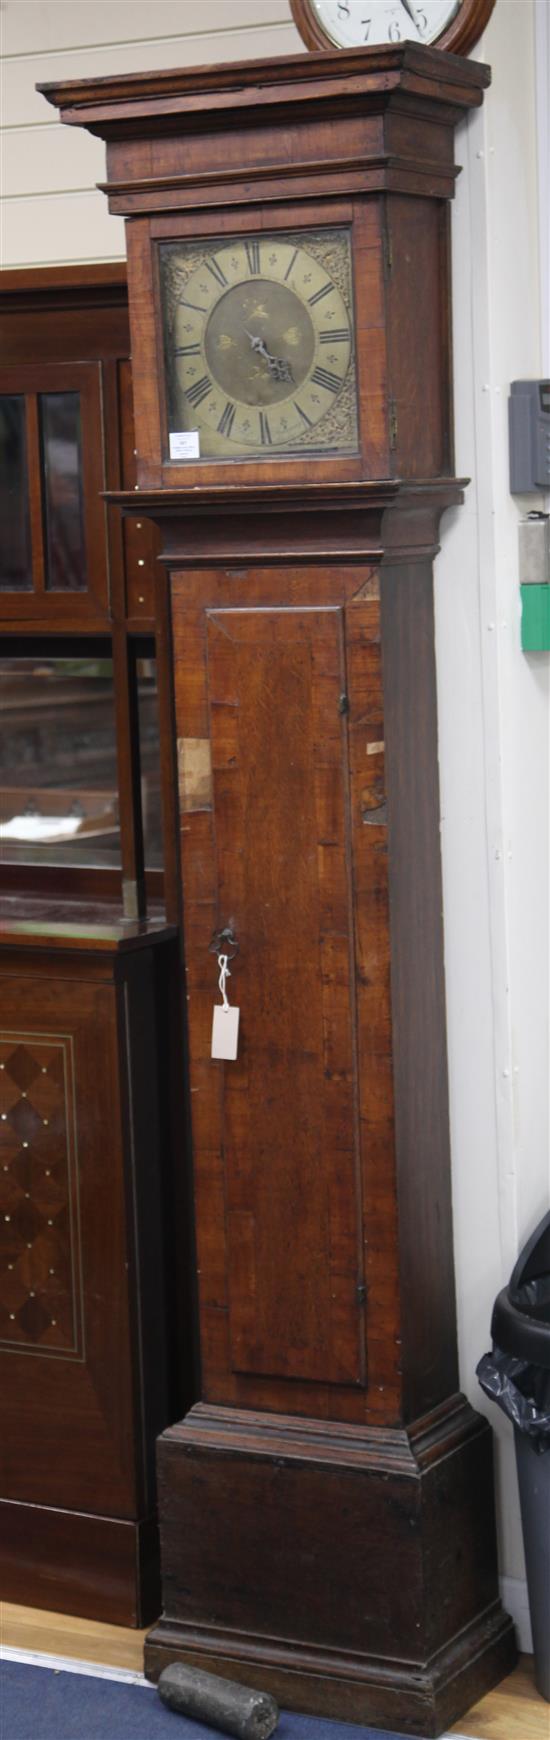 Thomas Halloway, Great Hasley. A George III oak and fruitwood thirty hour longcase clock, 6ft 10in.